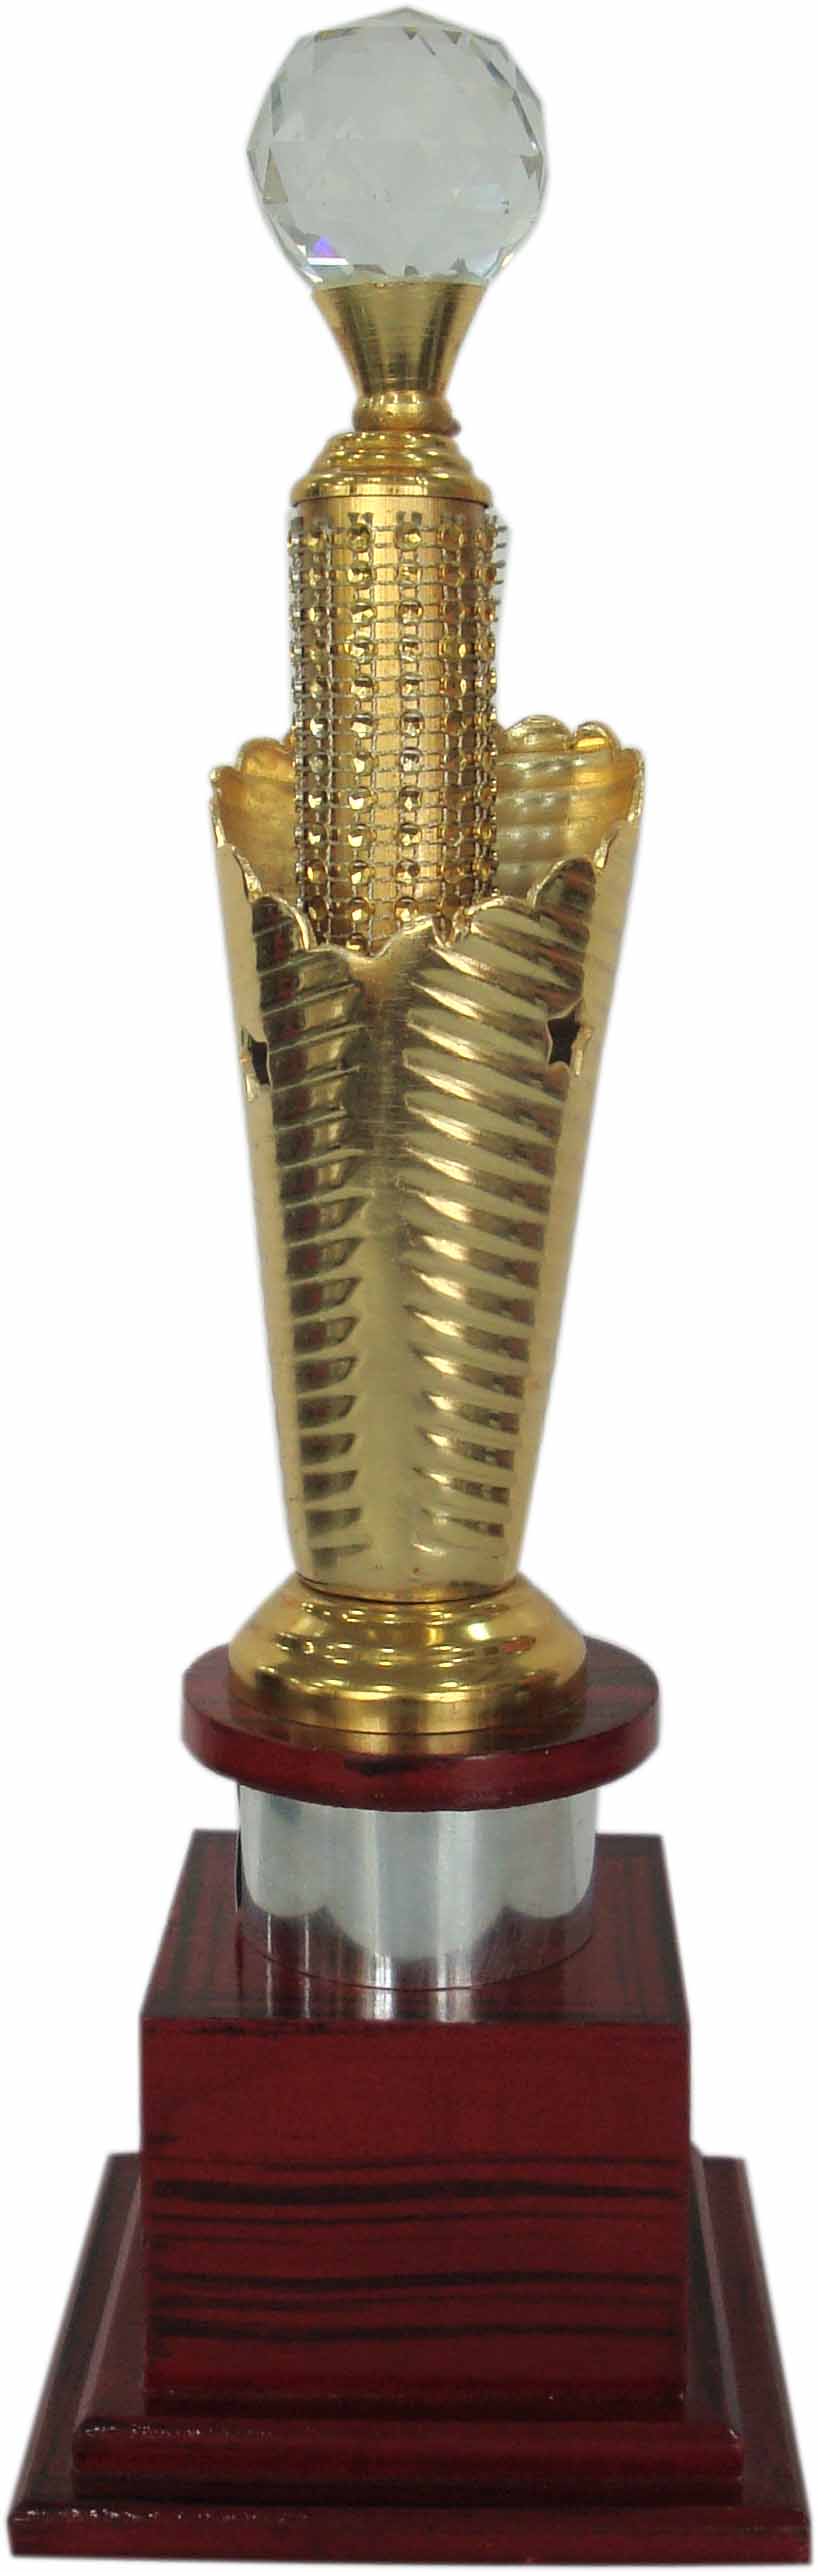 METAL - 168  | Prize Land | METAL TROPHY MANUFACTURE IN CHANDIGARH  - GLK2299